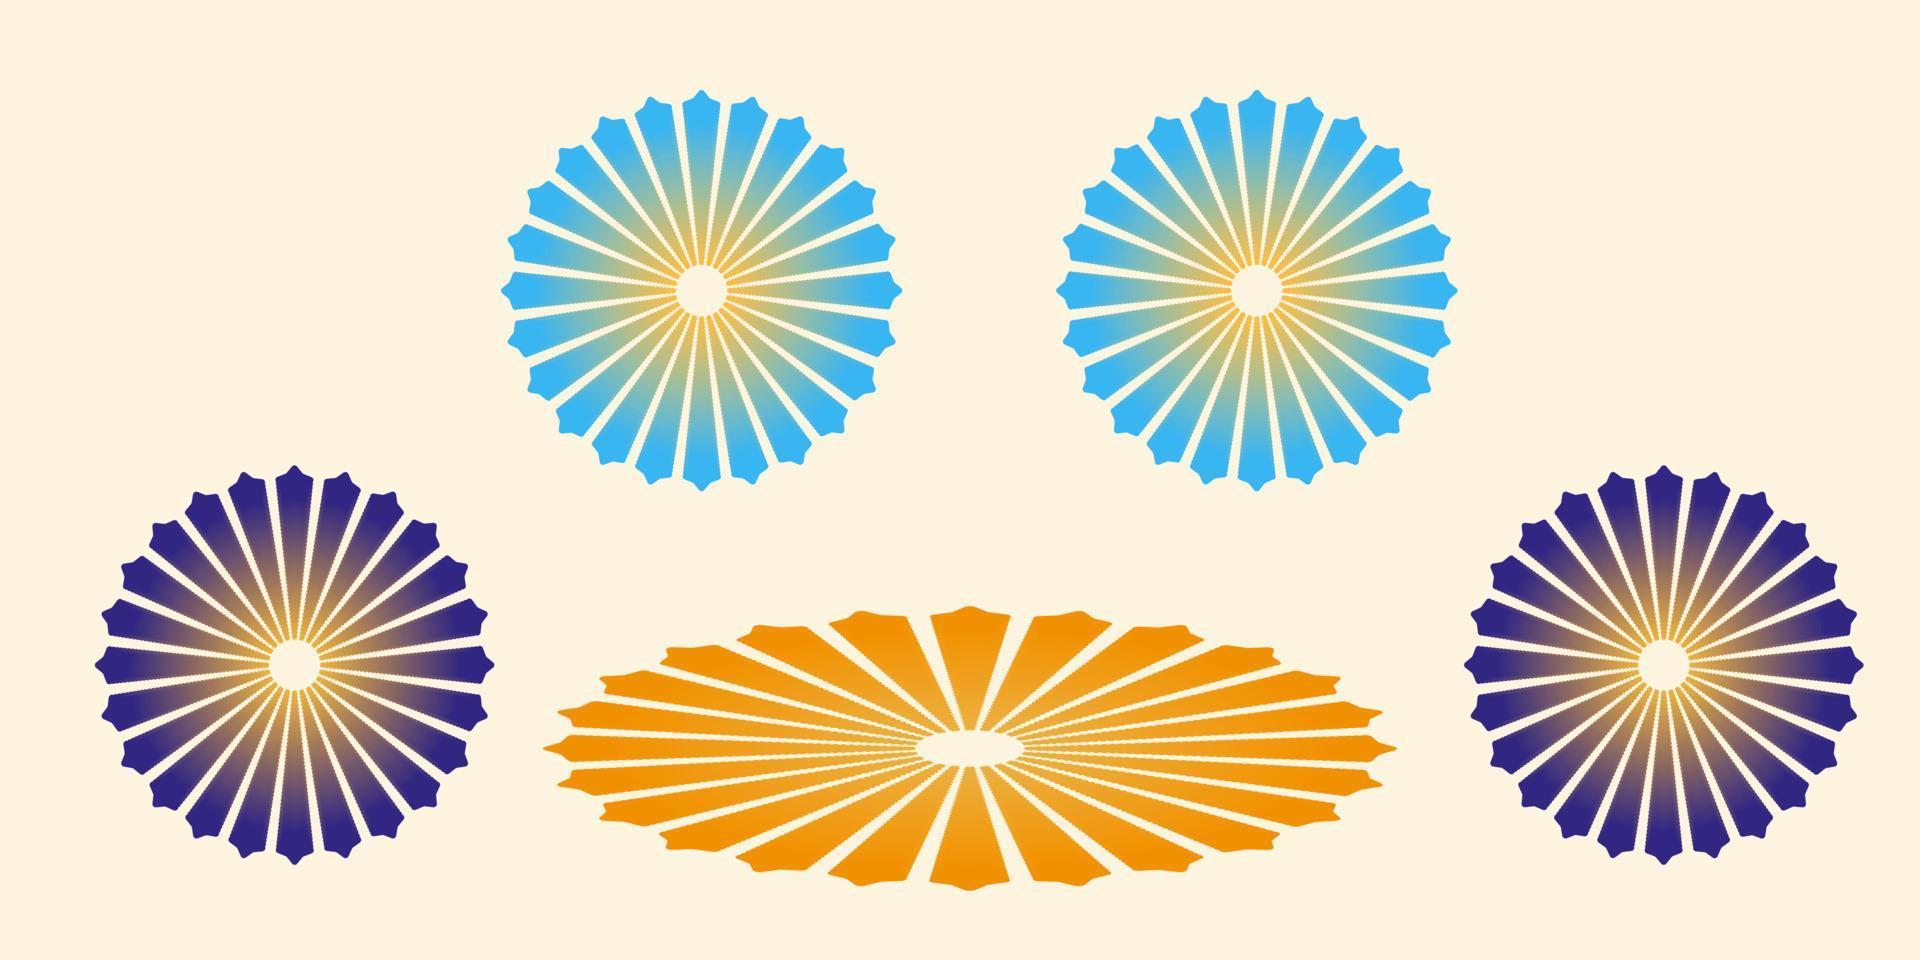 Geometric flowers blue, yellow and navy colors. Vector illustration